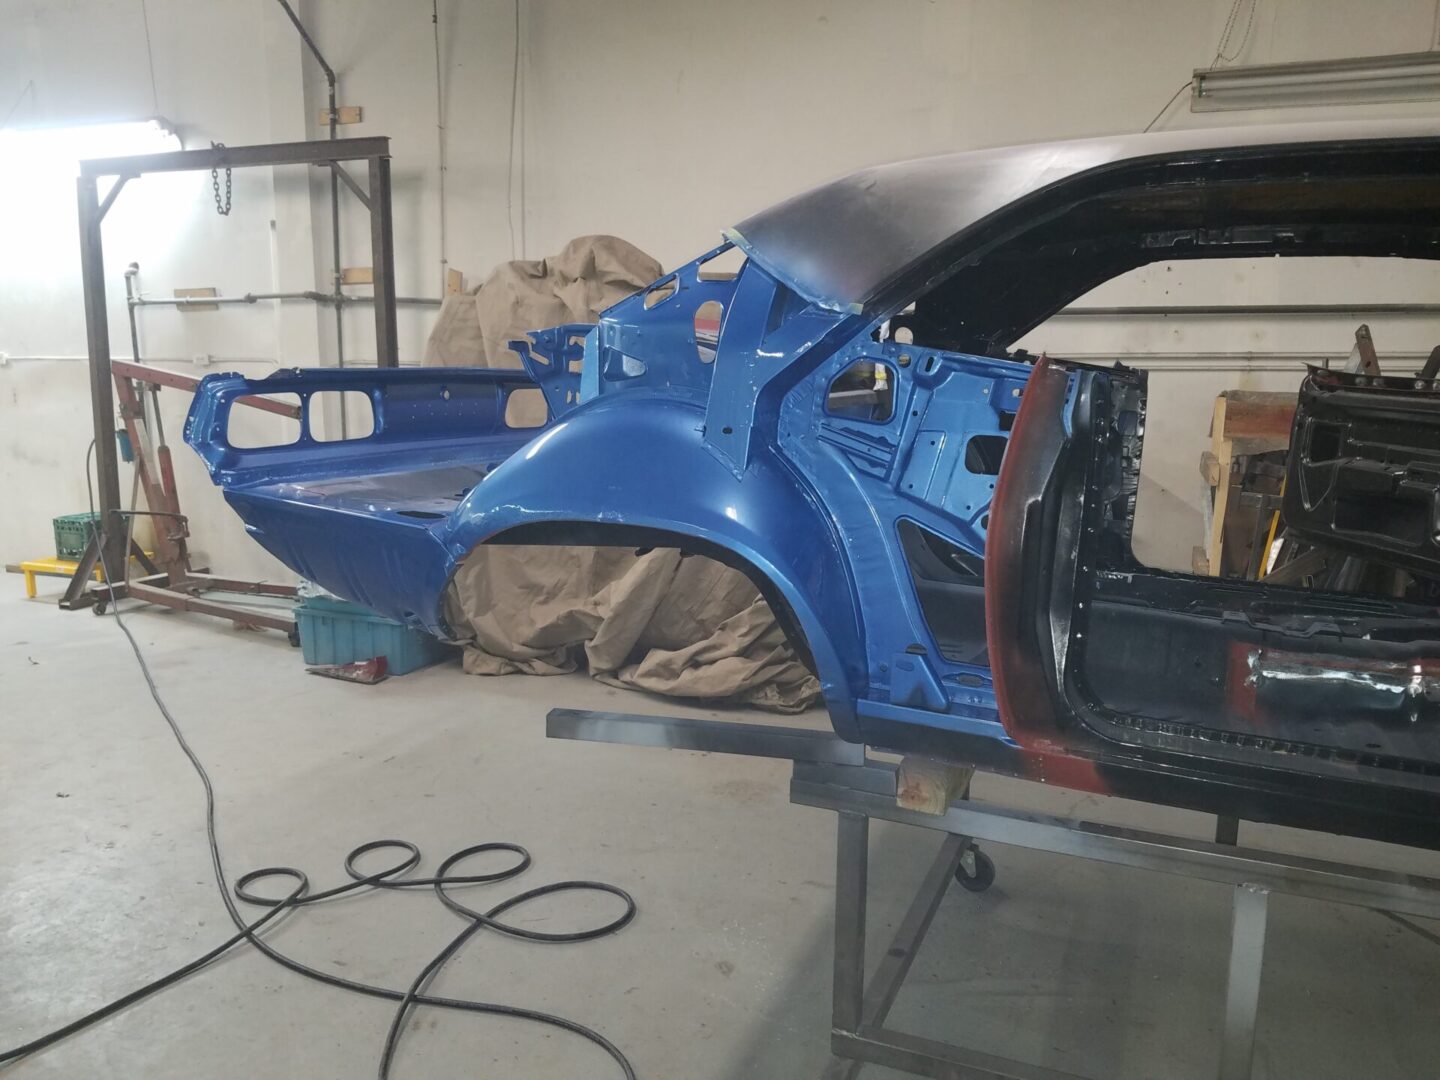 A blue colored 1972 Dodge Challenger Rallye frame